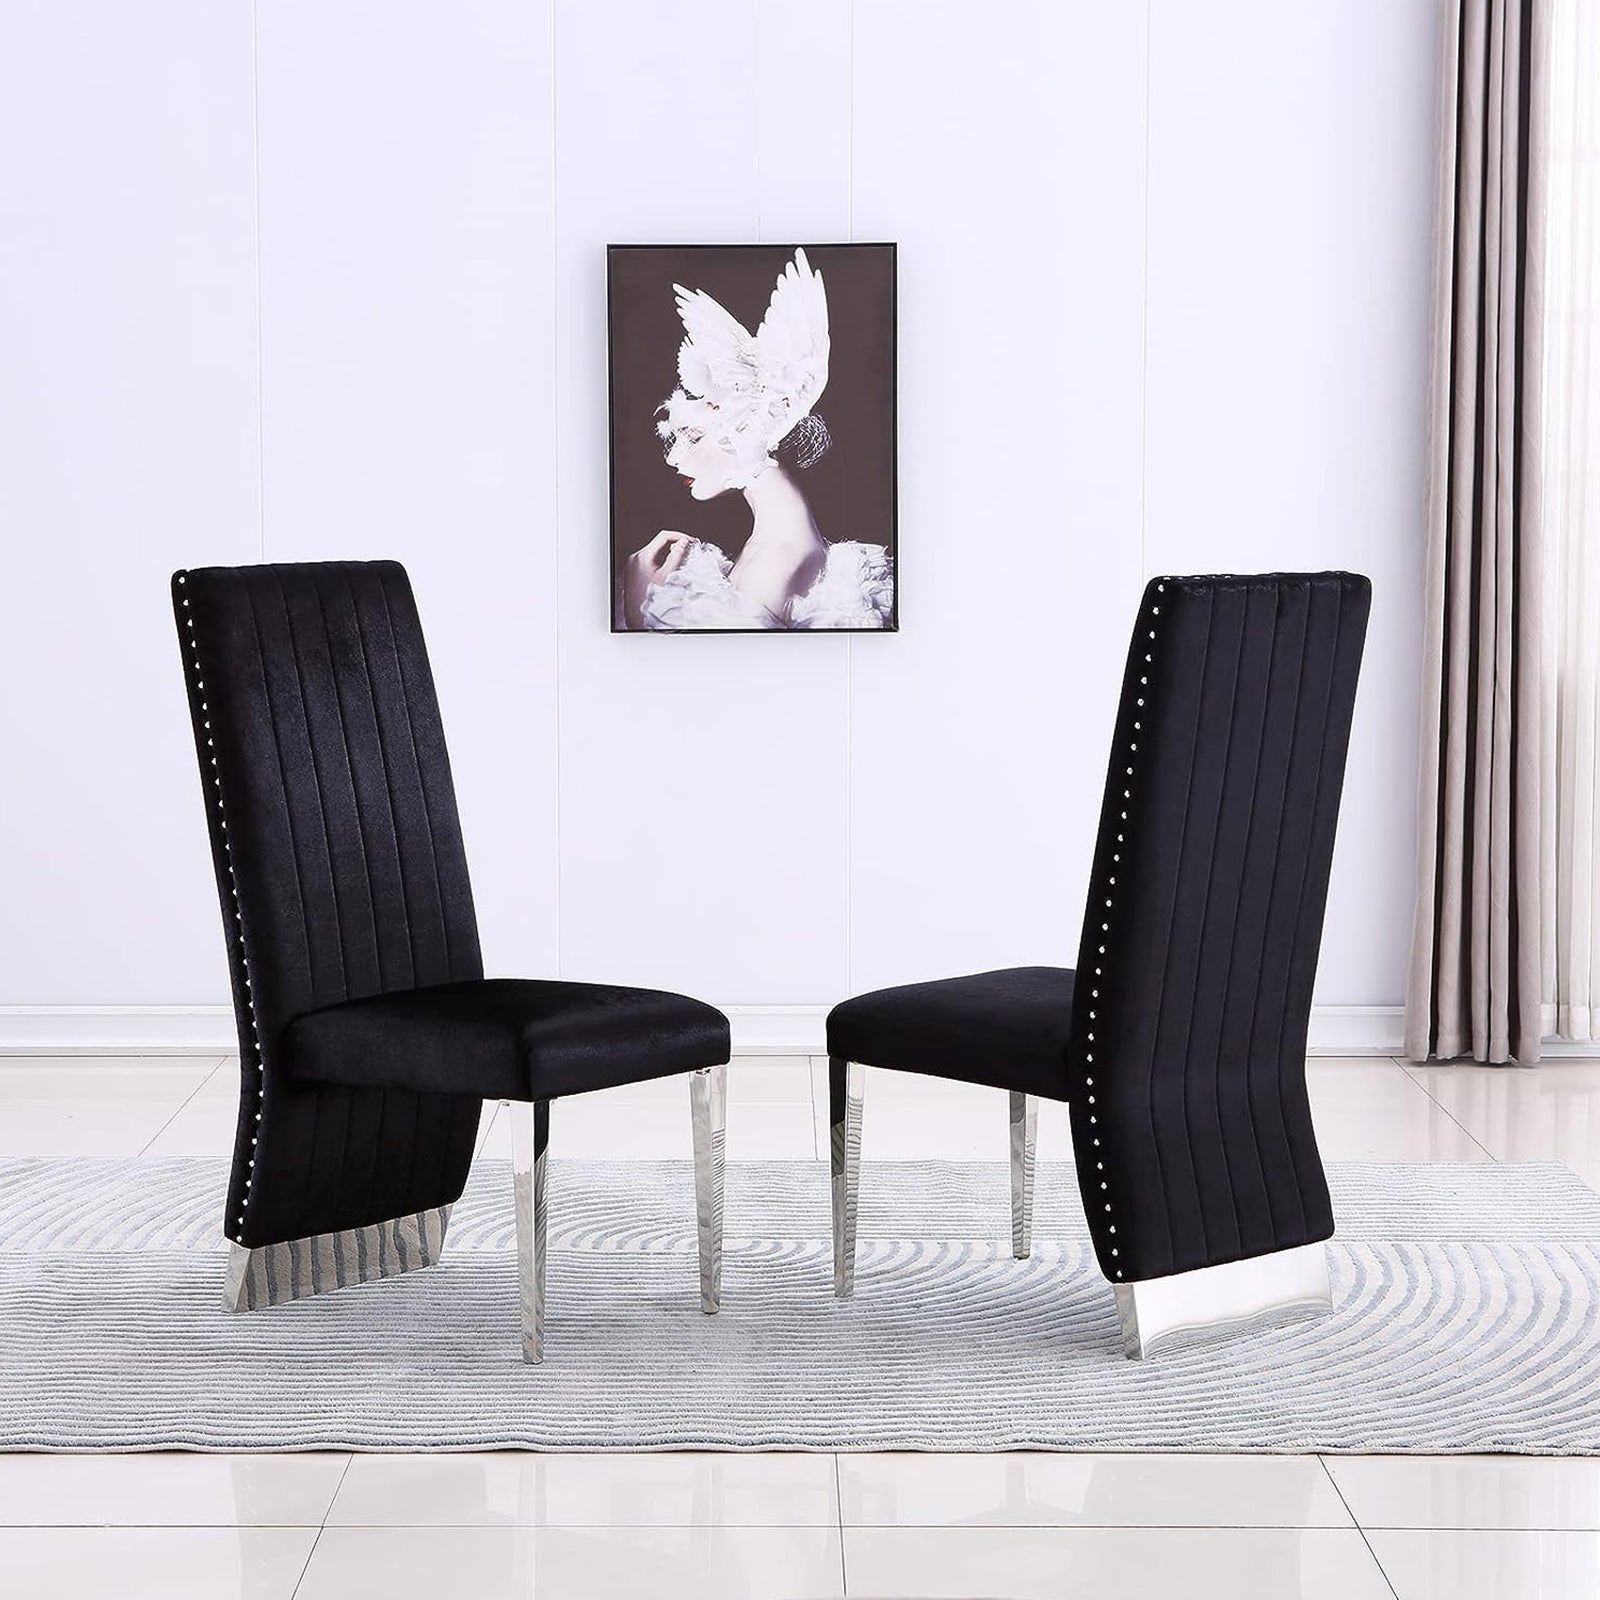 Sophistication and Comfort: The Features of the Black Velvet Dining Chair